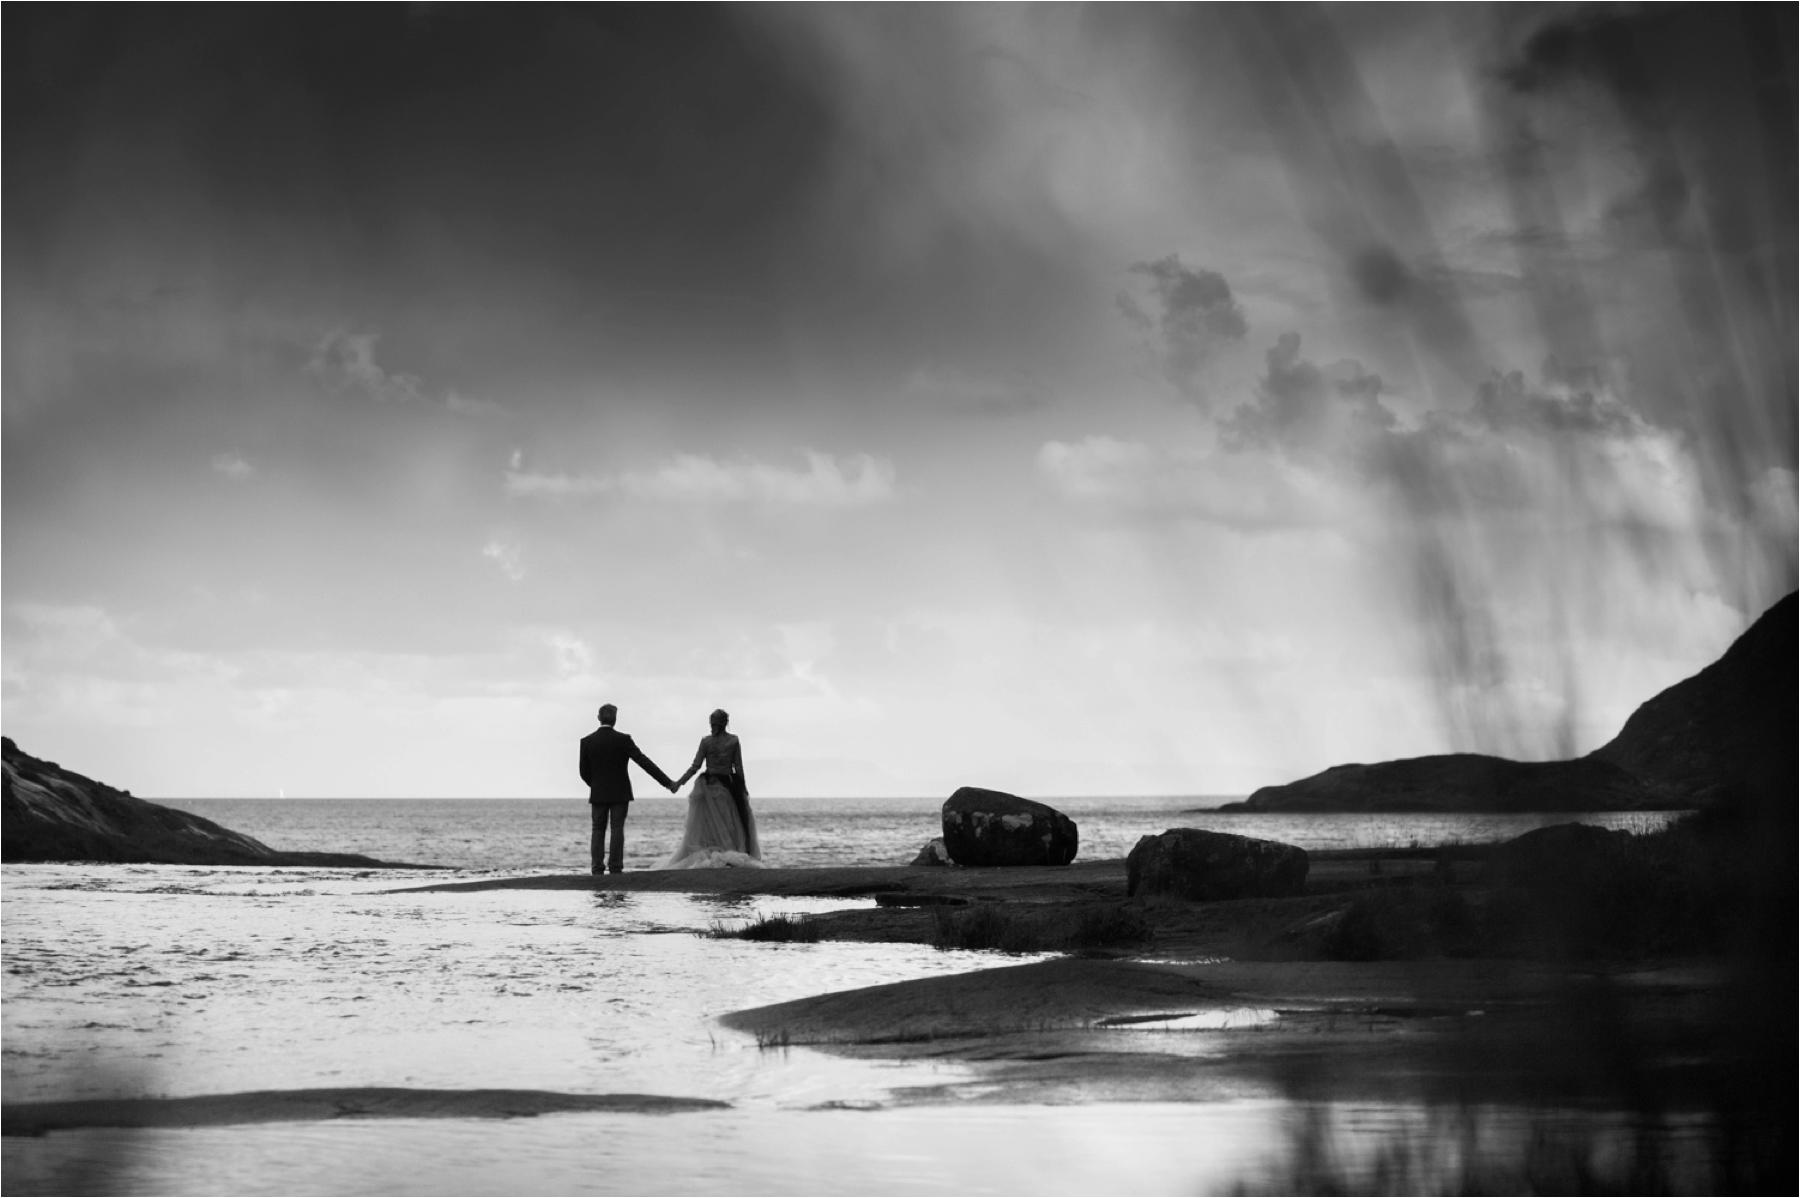 Rain heads toward the bride and groom in this black and white wedding photo, adding drama as well as a drenching. 